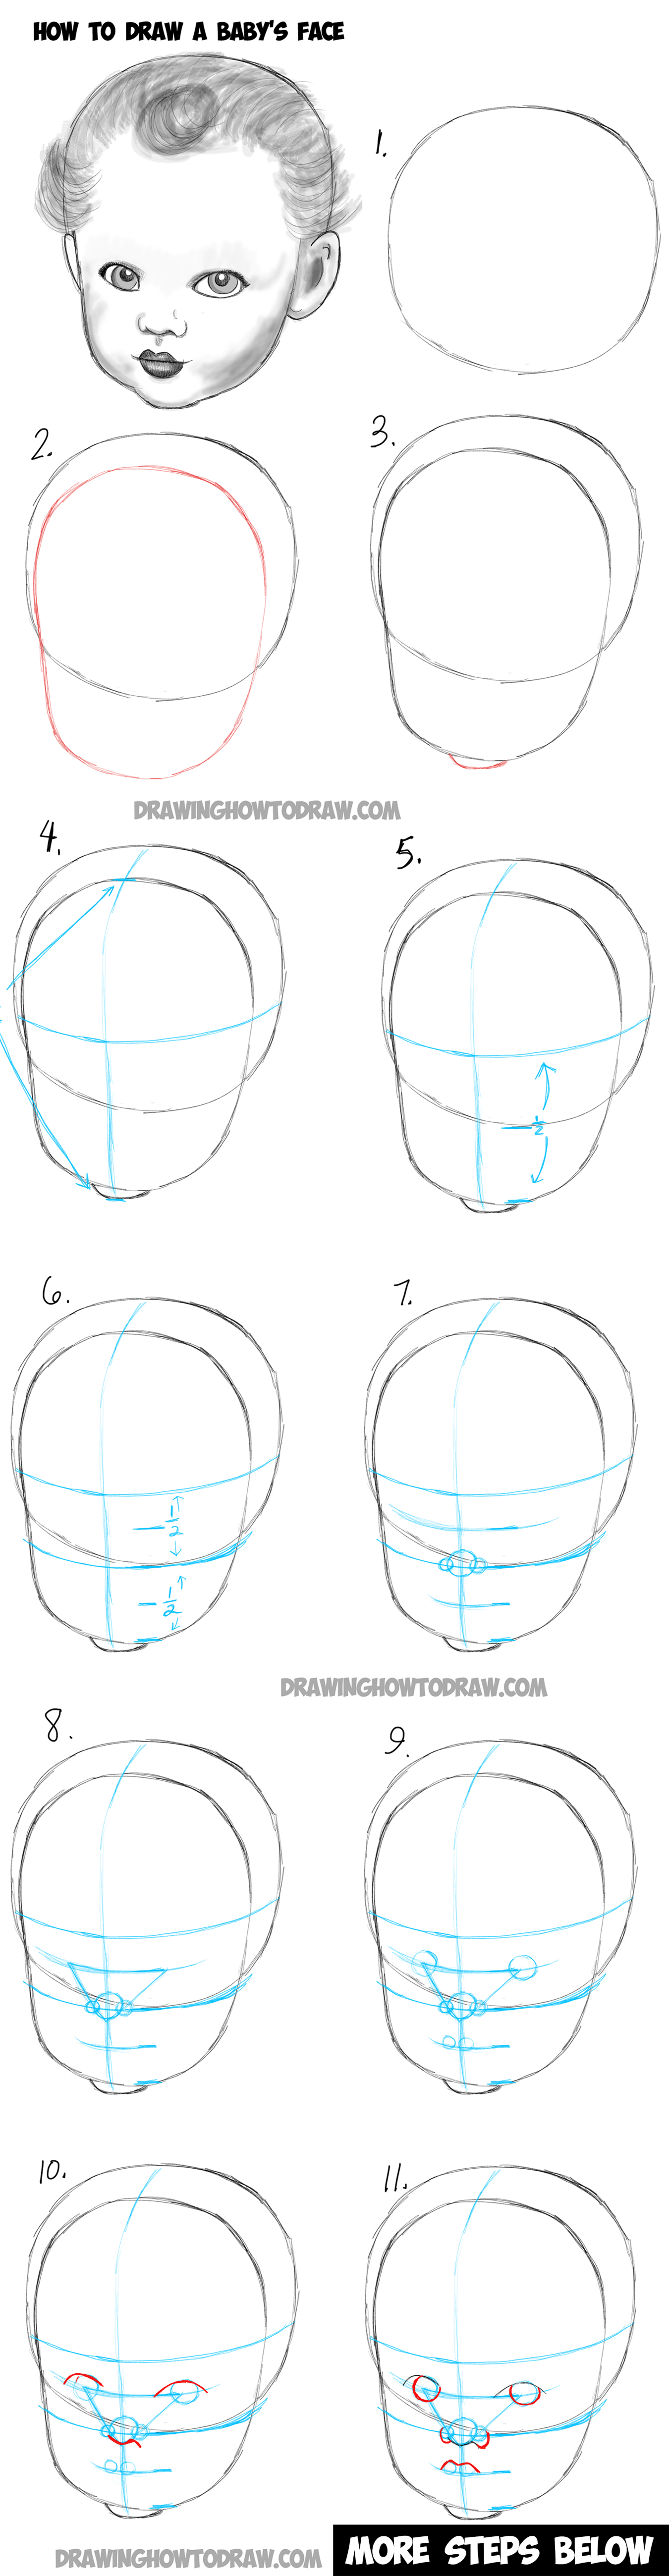 How to Draw a Baby's Face Drawing Infant Faces with Step by Step